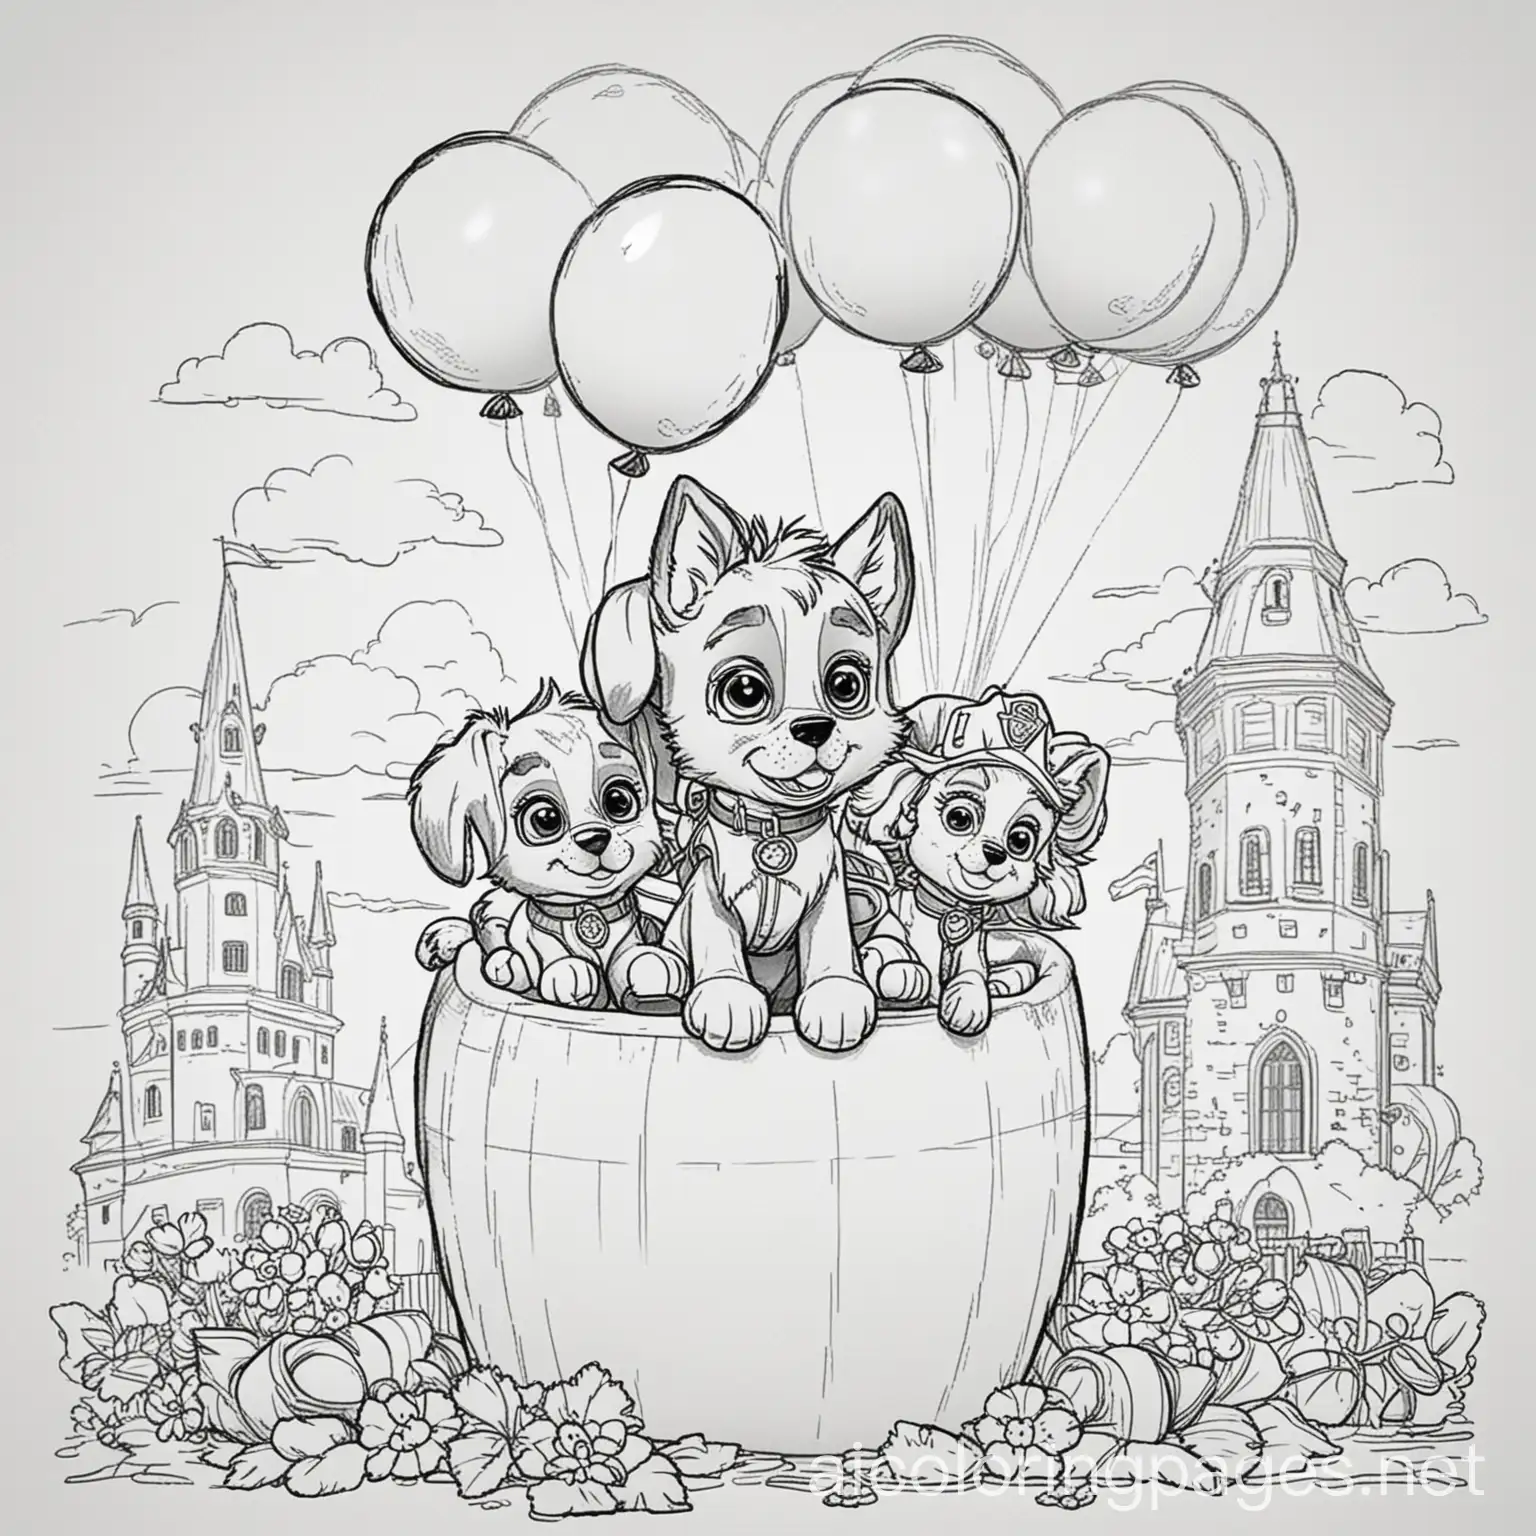 Coloring Page Outline: Kids and Bean Bags:  Two kids sitting on bean bags. One child holding a large vase with flowers. Paw Patrol Characters:  A police dog (similar to Chase). A firefighter dog (similar to Marshall). A pilot dog (similar to Skye). The dogs are playfully interacting with the kids. Background:  Kaunas Castle. The Town Hall of Kaunas. Additional Elements:  Balloons floating above the kids and dogs, adding a festive atmosphere., Coloring Page, black and white, line art, white background, Simplicity, Ample White Space. The background of the coloring page is plain white to make it easy for young children to color within the lines. The outlines of all the subjects are easy to distinguish, making it simple for kids to color without too much difficulty